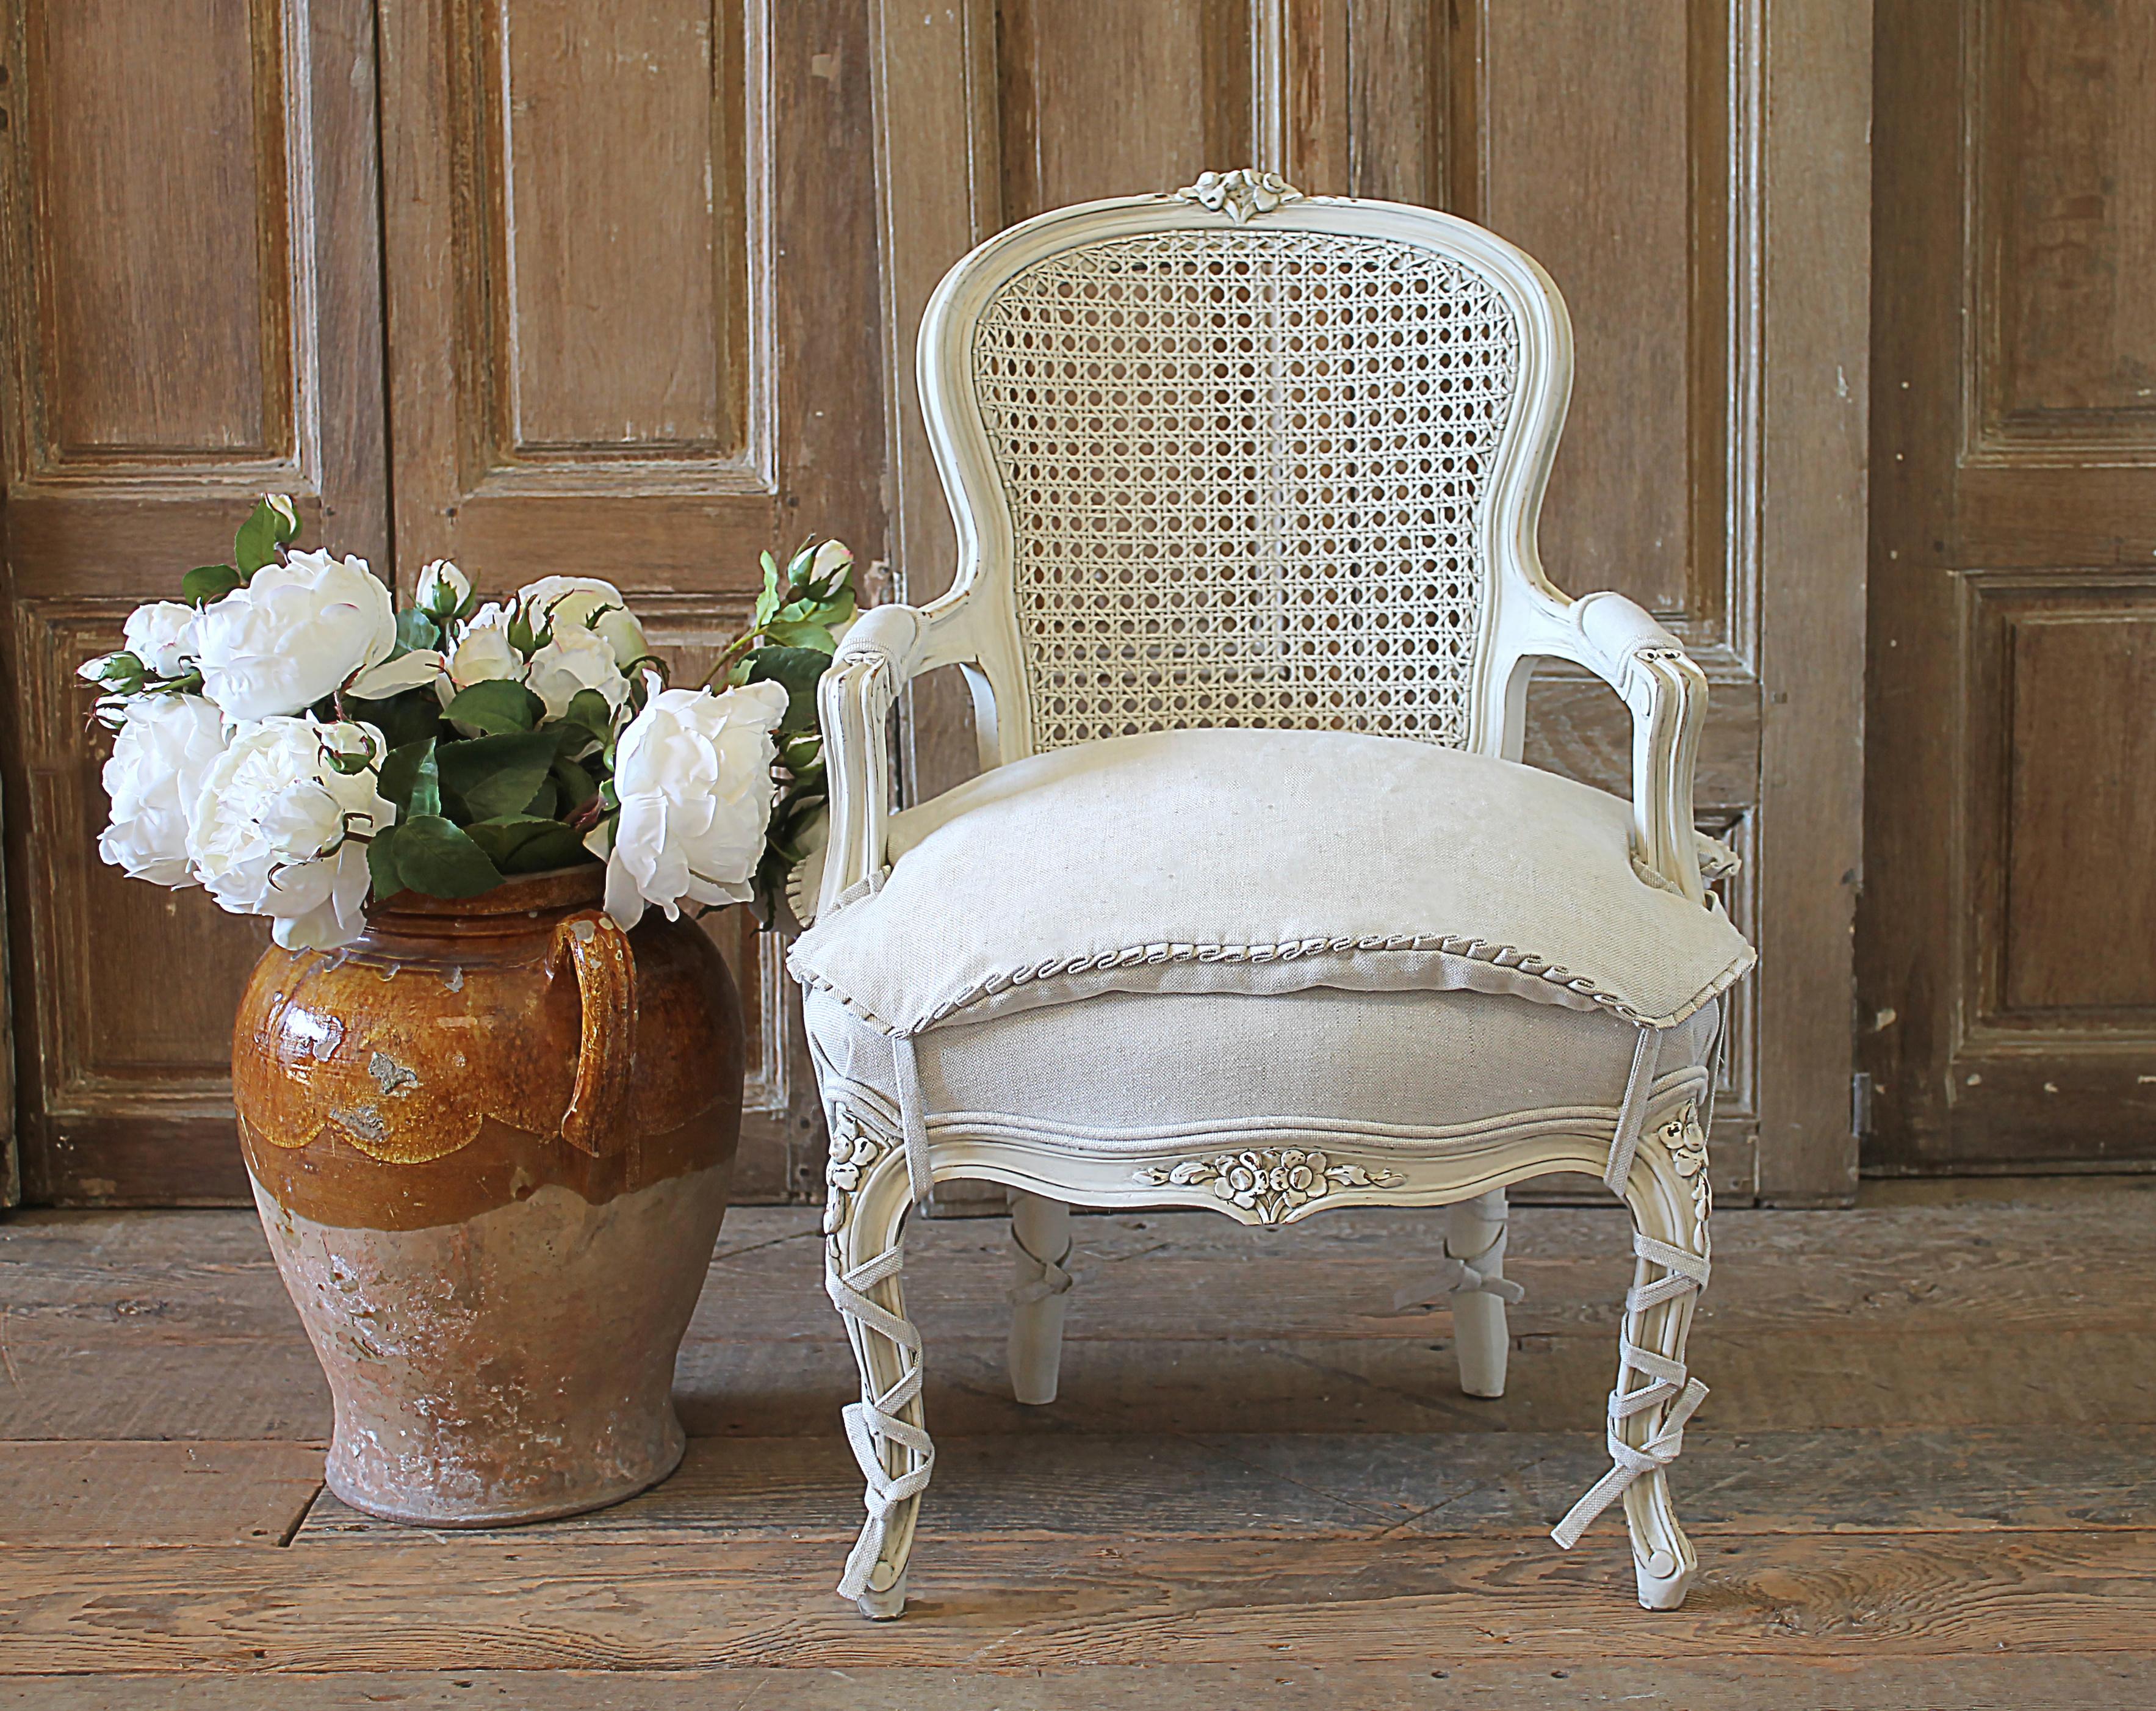 20th century French style Louis XV cane back childs chair. Beautifully painted chair in our oyster white finish, with subtle distressed edges, and finished with an antique glazed patina. Classic Louis XV Style. Reupholstered in a Greige colored